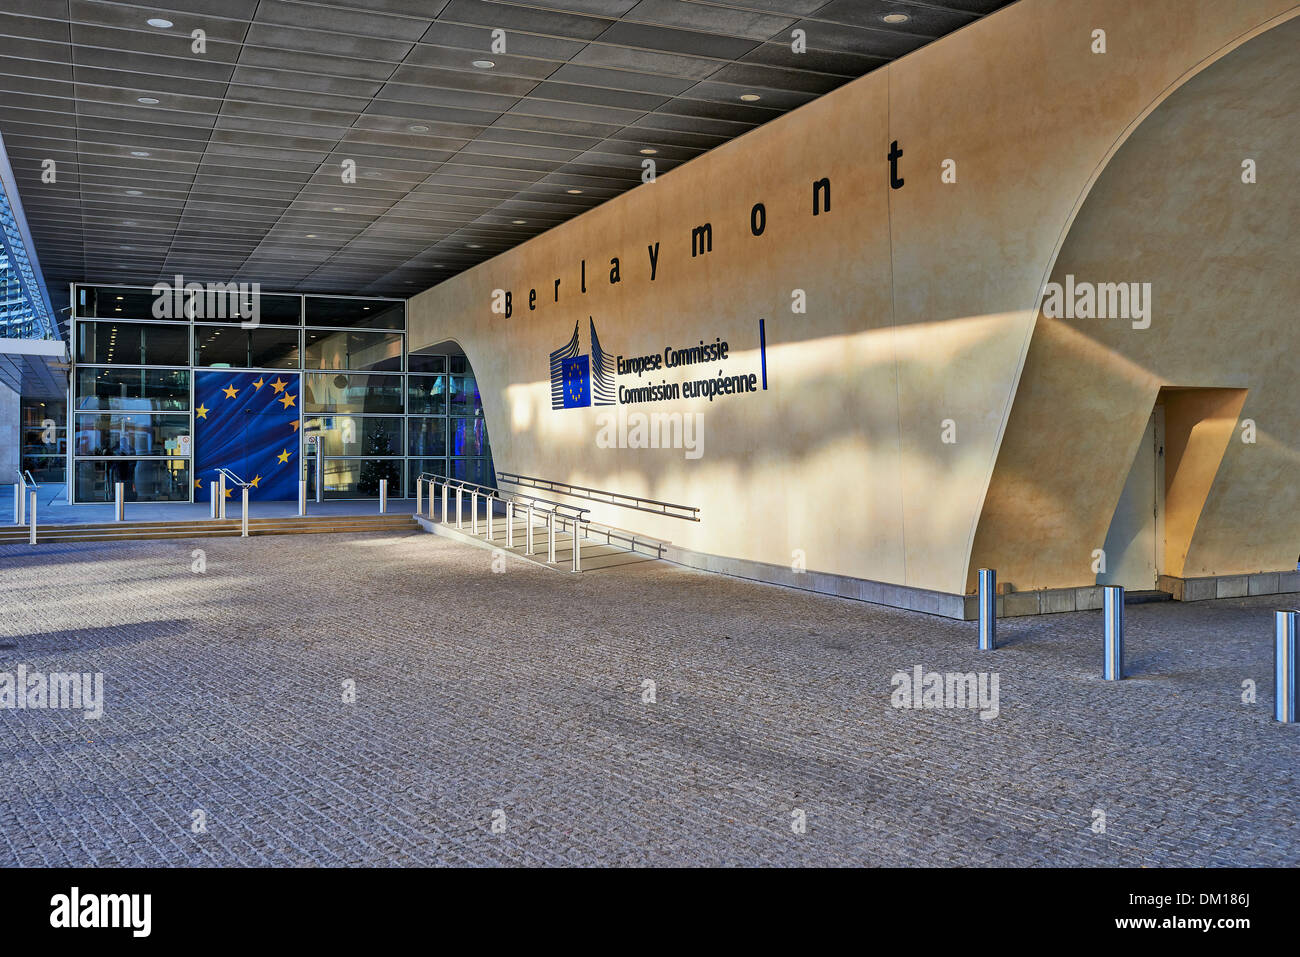 The Berlaymont building entrance in Brussels. Stock Photo